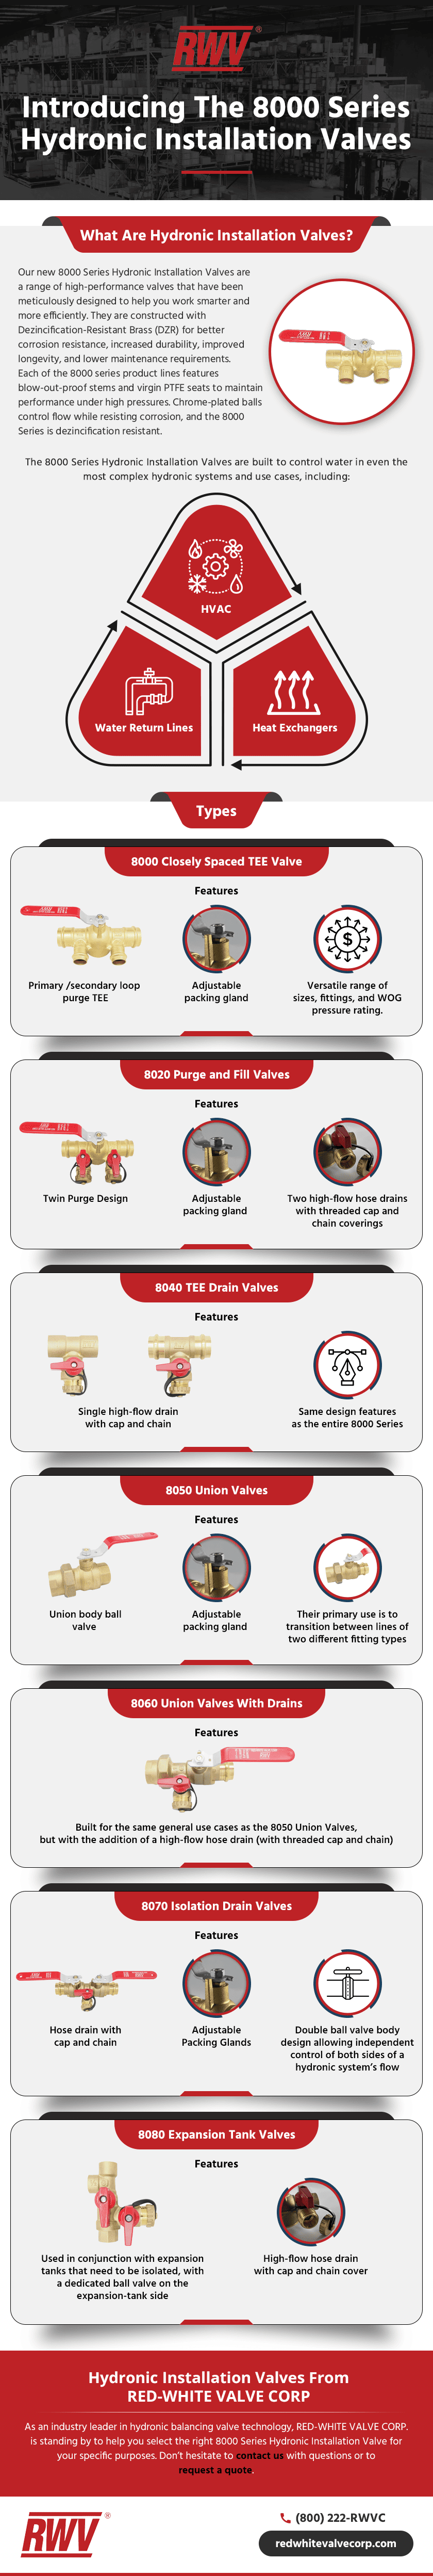 Introducing The 8000 Series Hydronic Installation Valves